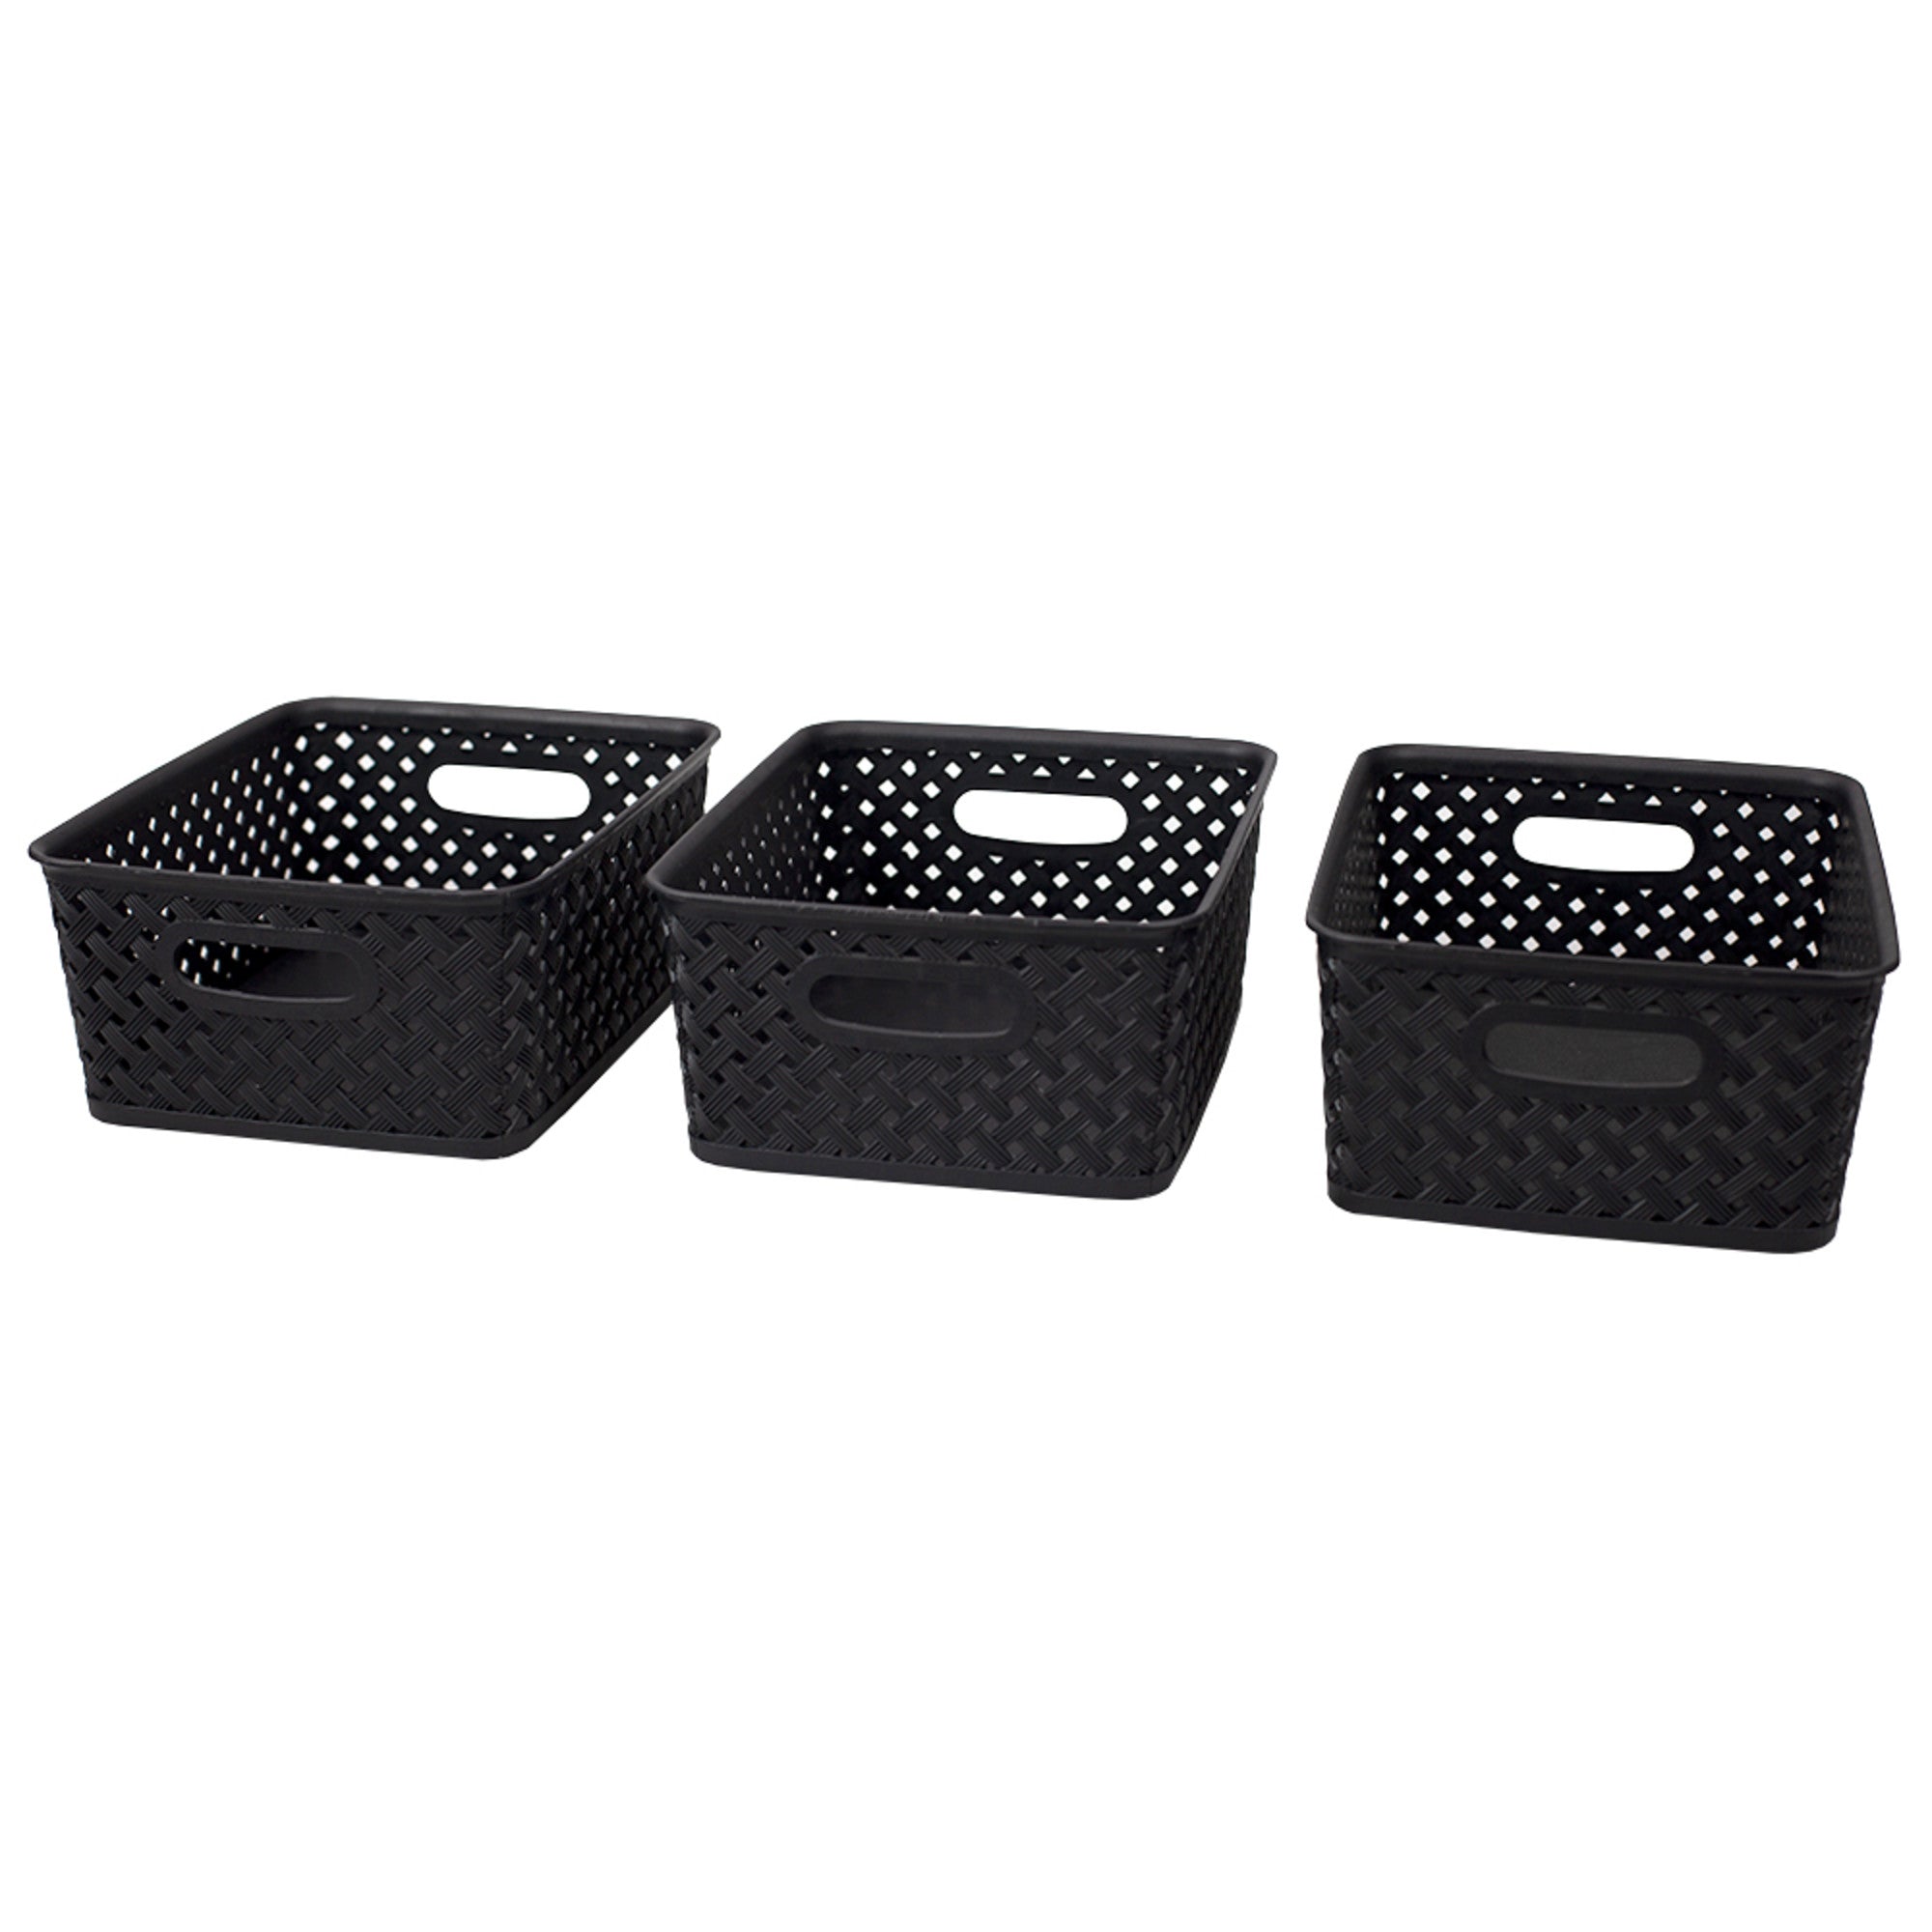 Home Basics Triple Woven 10" x 7.75" x 4" Multi-Purpose Stackable Plastic Storage Basket, (Pack of 3) - Assorted Colors